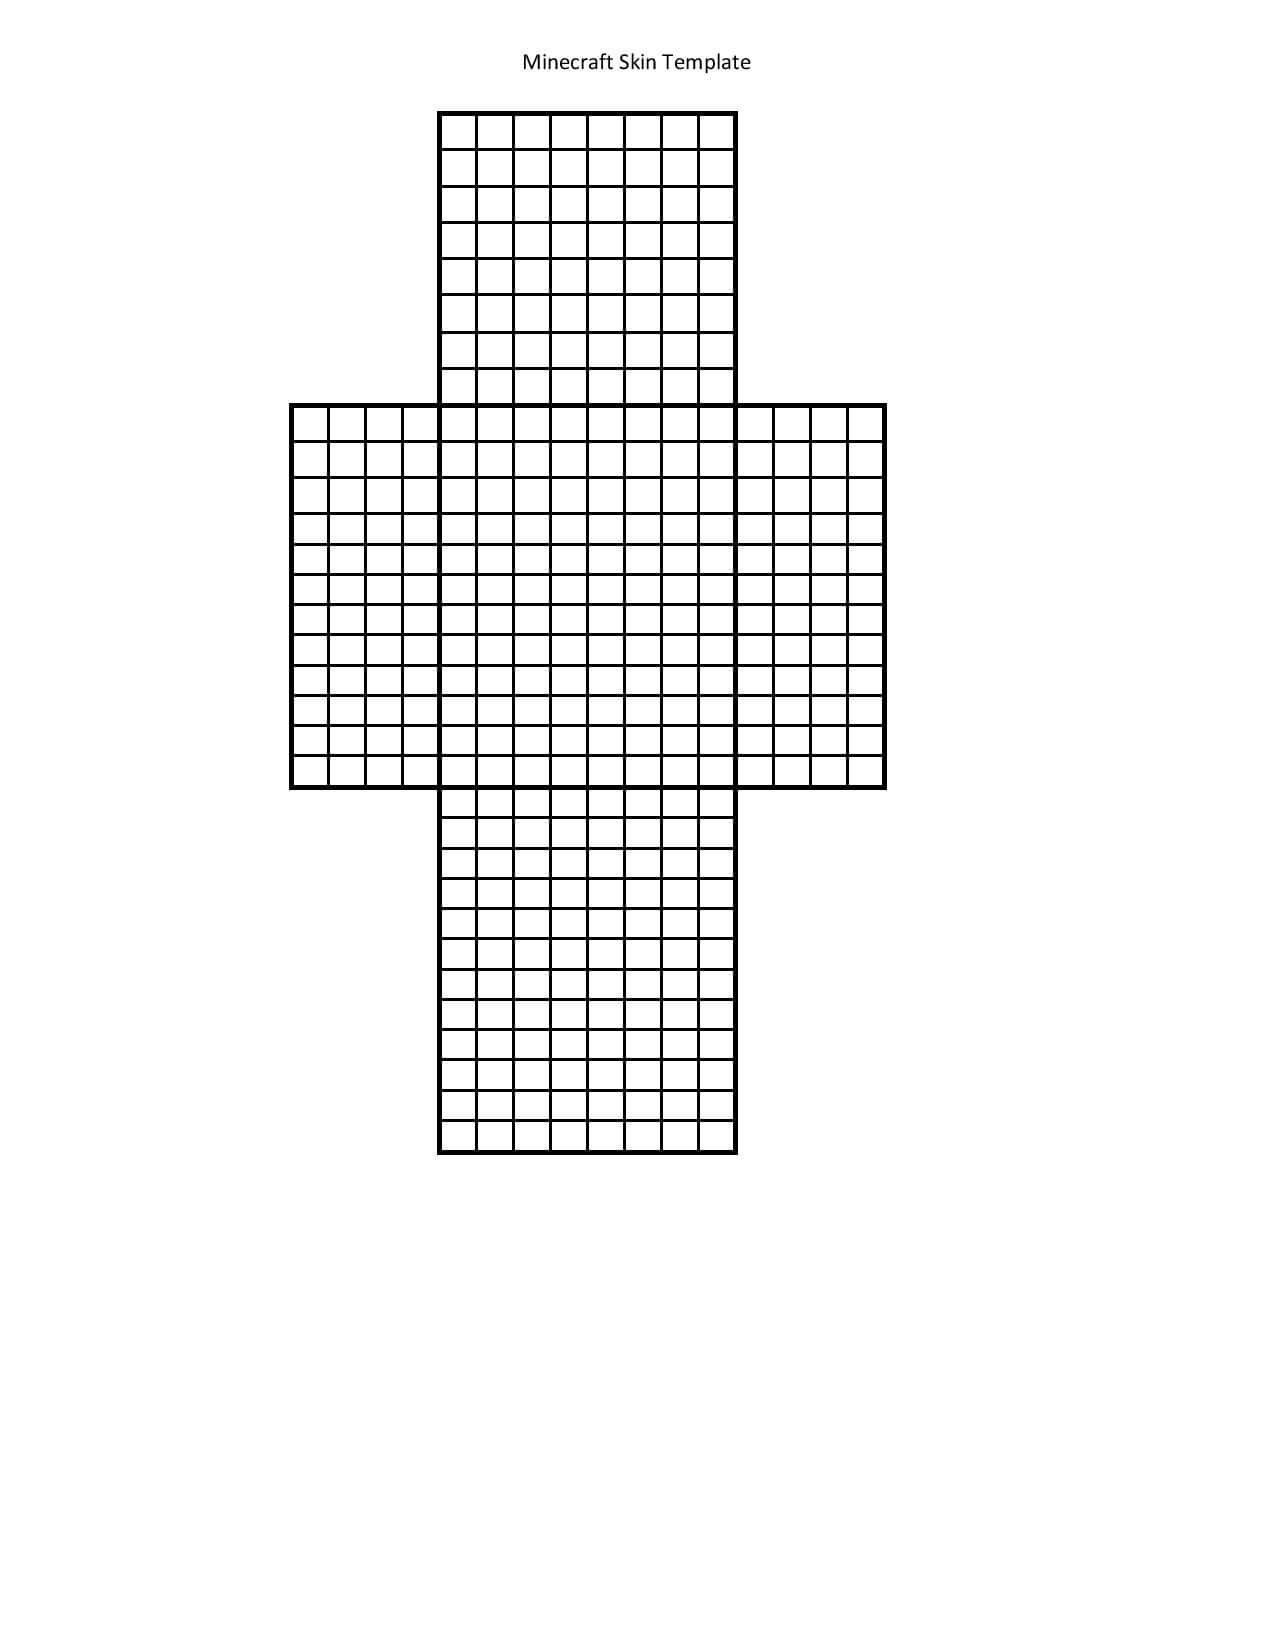 Printable Template For Minecraft Skin Creation. Use Markers Regarding Minecraft Blank Skin Template